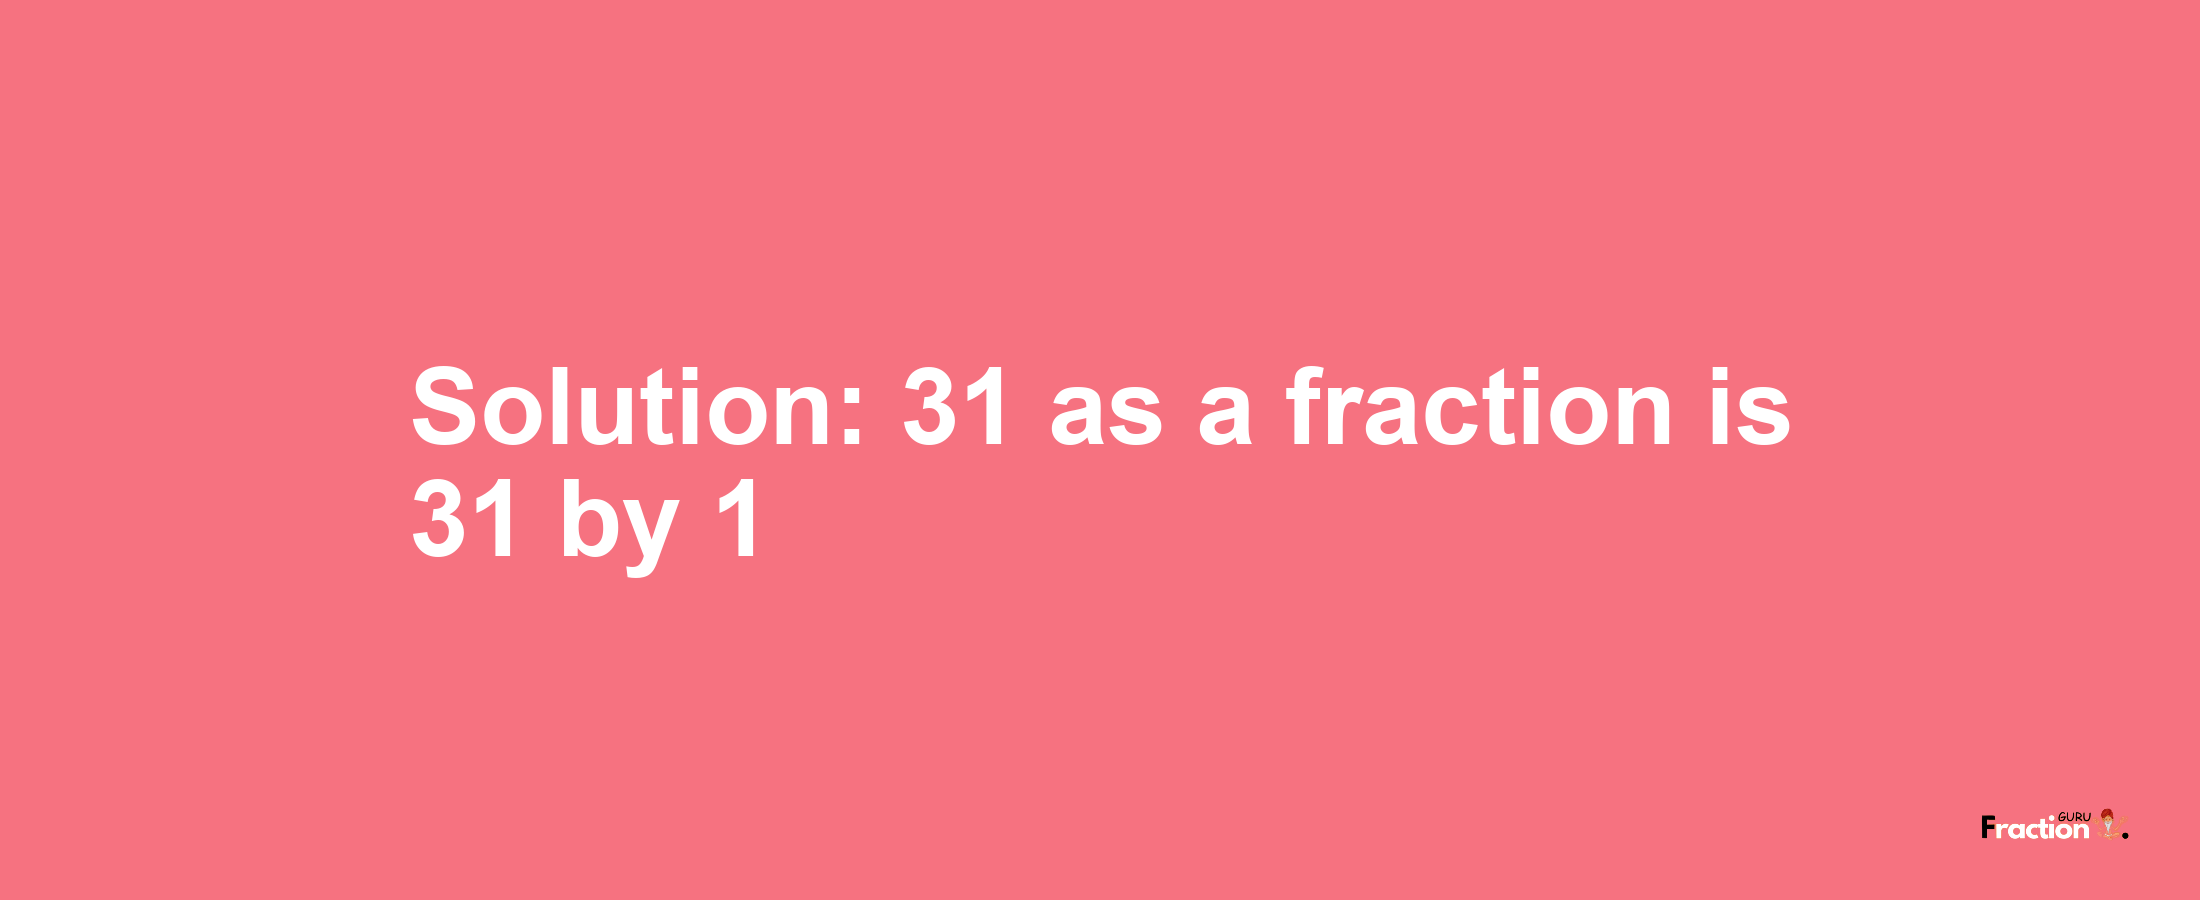 Solution:31 as a fraction is 31/1